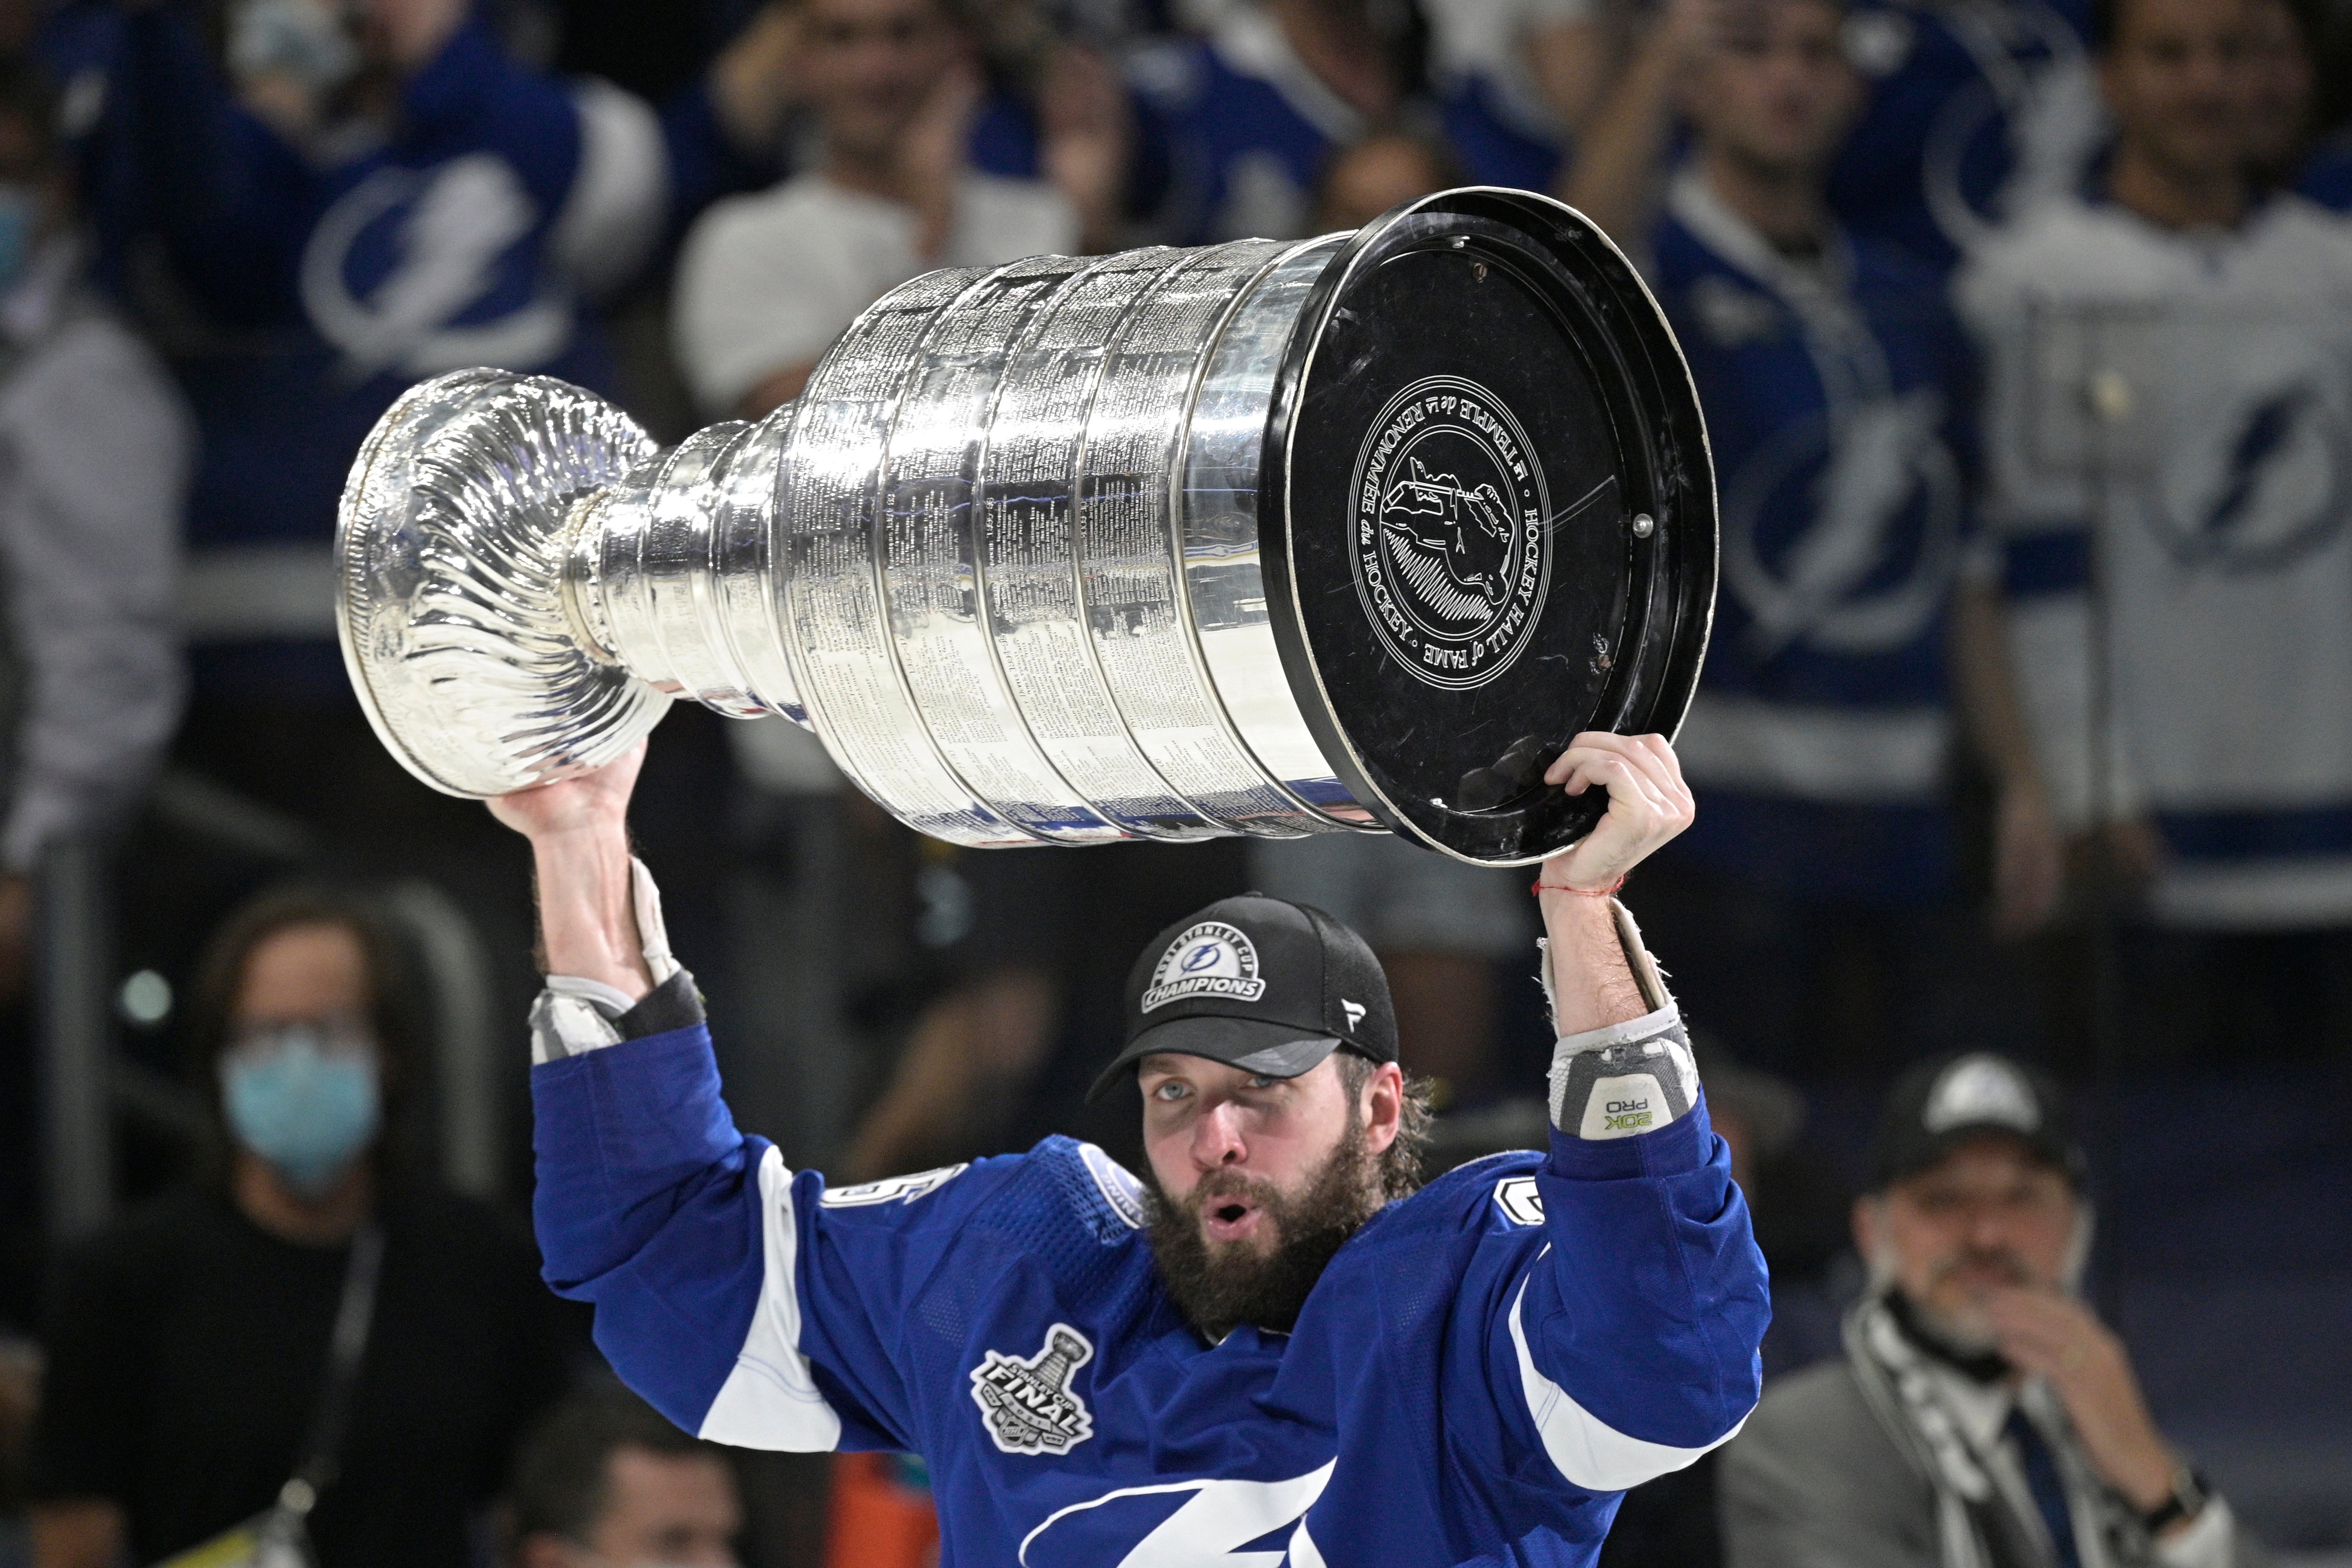 Every Tampa Bay Lightning GOAL during the 2021 Stanley Cup